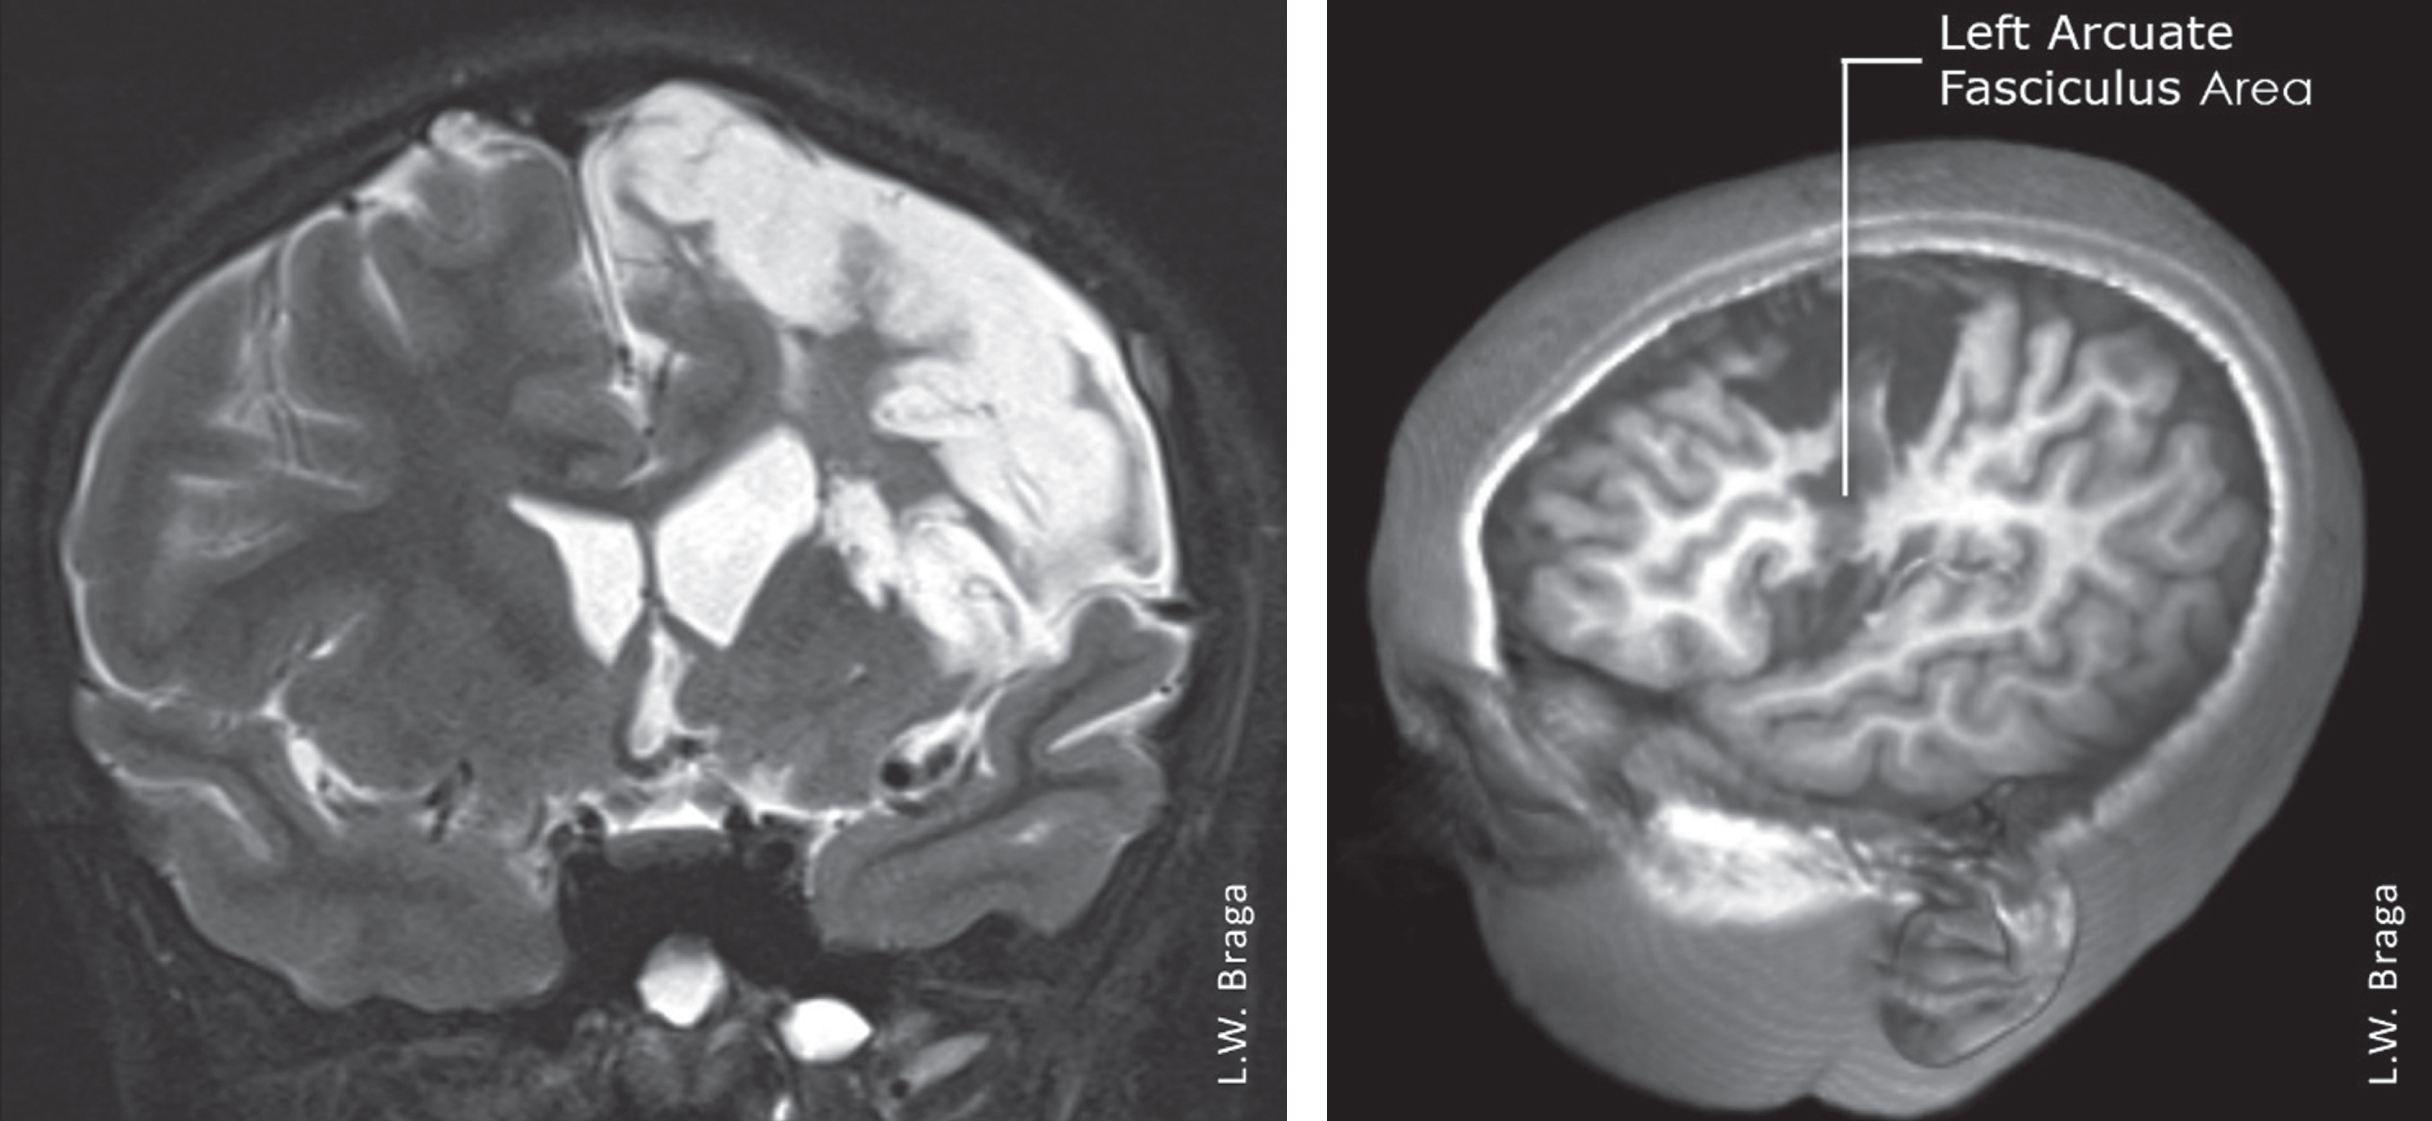 MRI images of TF ten months after injury, showing extensive lesion in the left cerebral hemisphere affecting brain areas responsible for language. There was an important lesion in the left arcuate fasciculus.